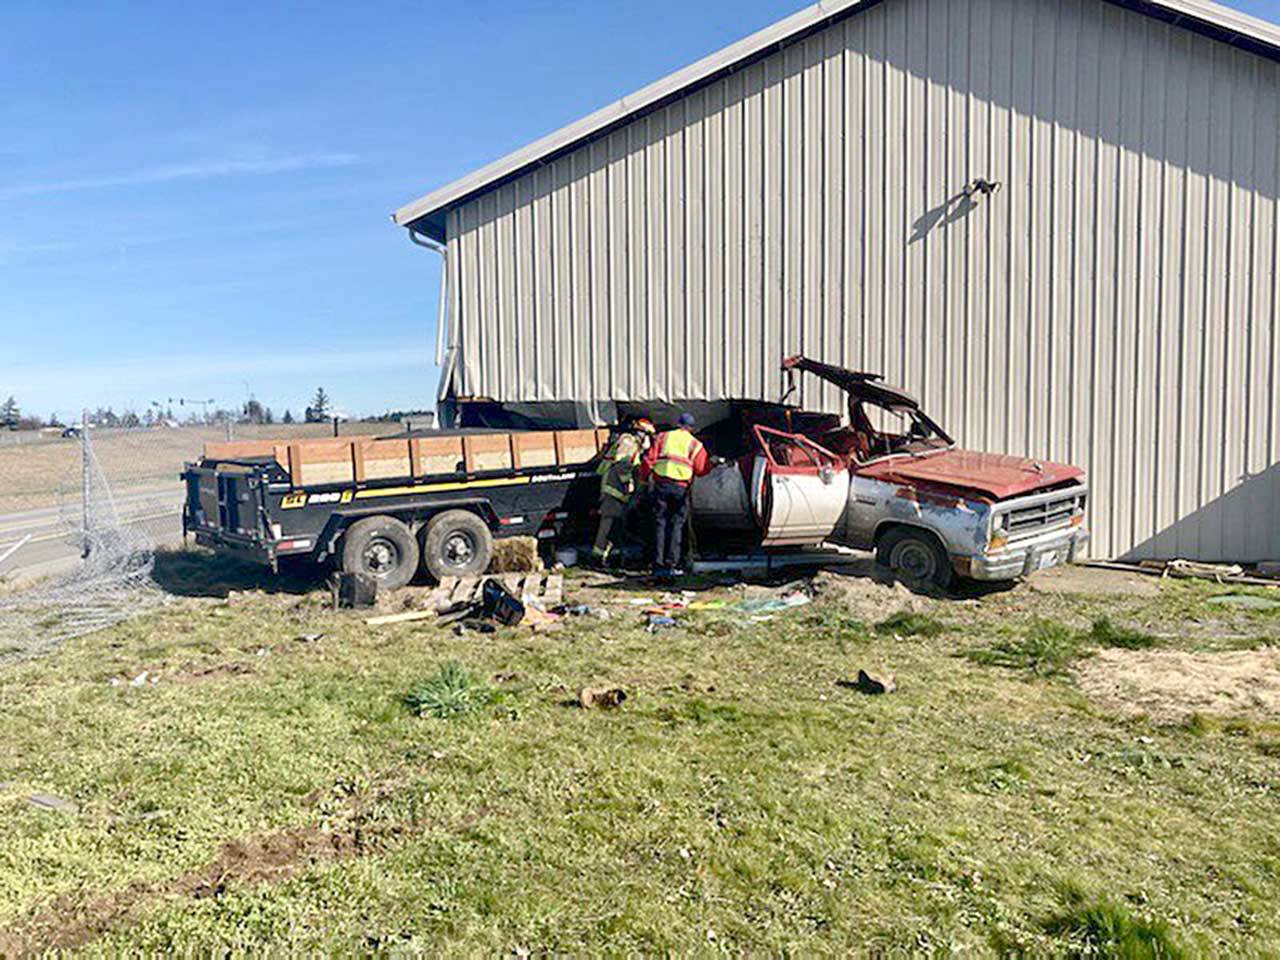 A Port Angeles man was transported to Olympic Medical Center with non-life-threatening injuries after his vehicle reportedly drifted off U.S. Highway 101 and into a building near River Road in Sequim last week. Photo courtesy of Washington State Patrol